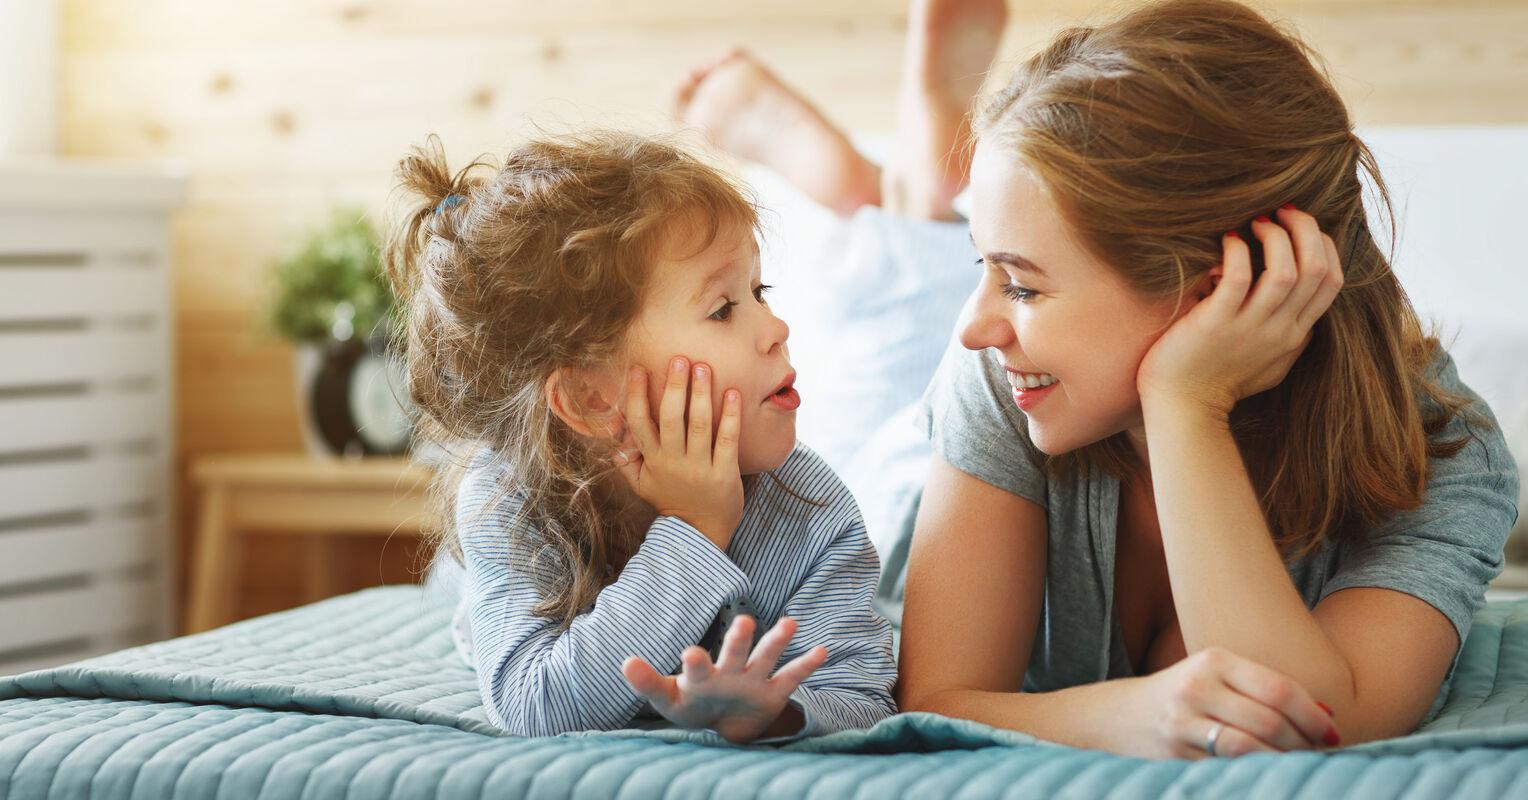 How To Change Your Child's Behavior—Without Punishment